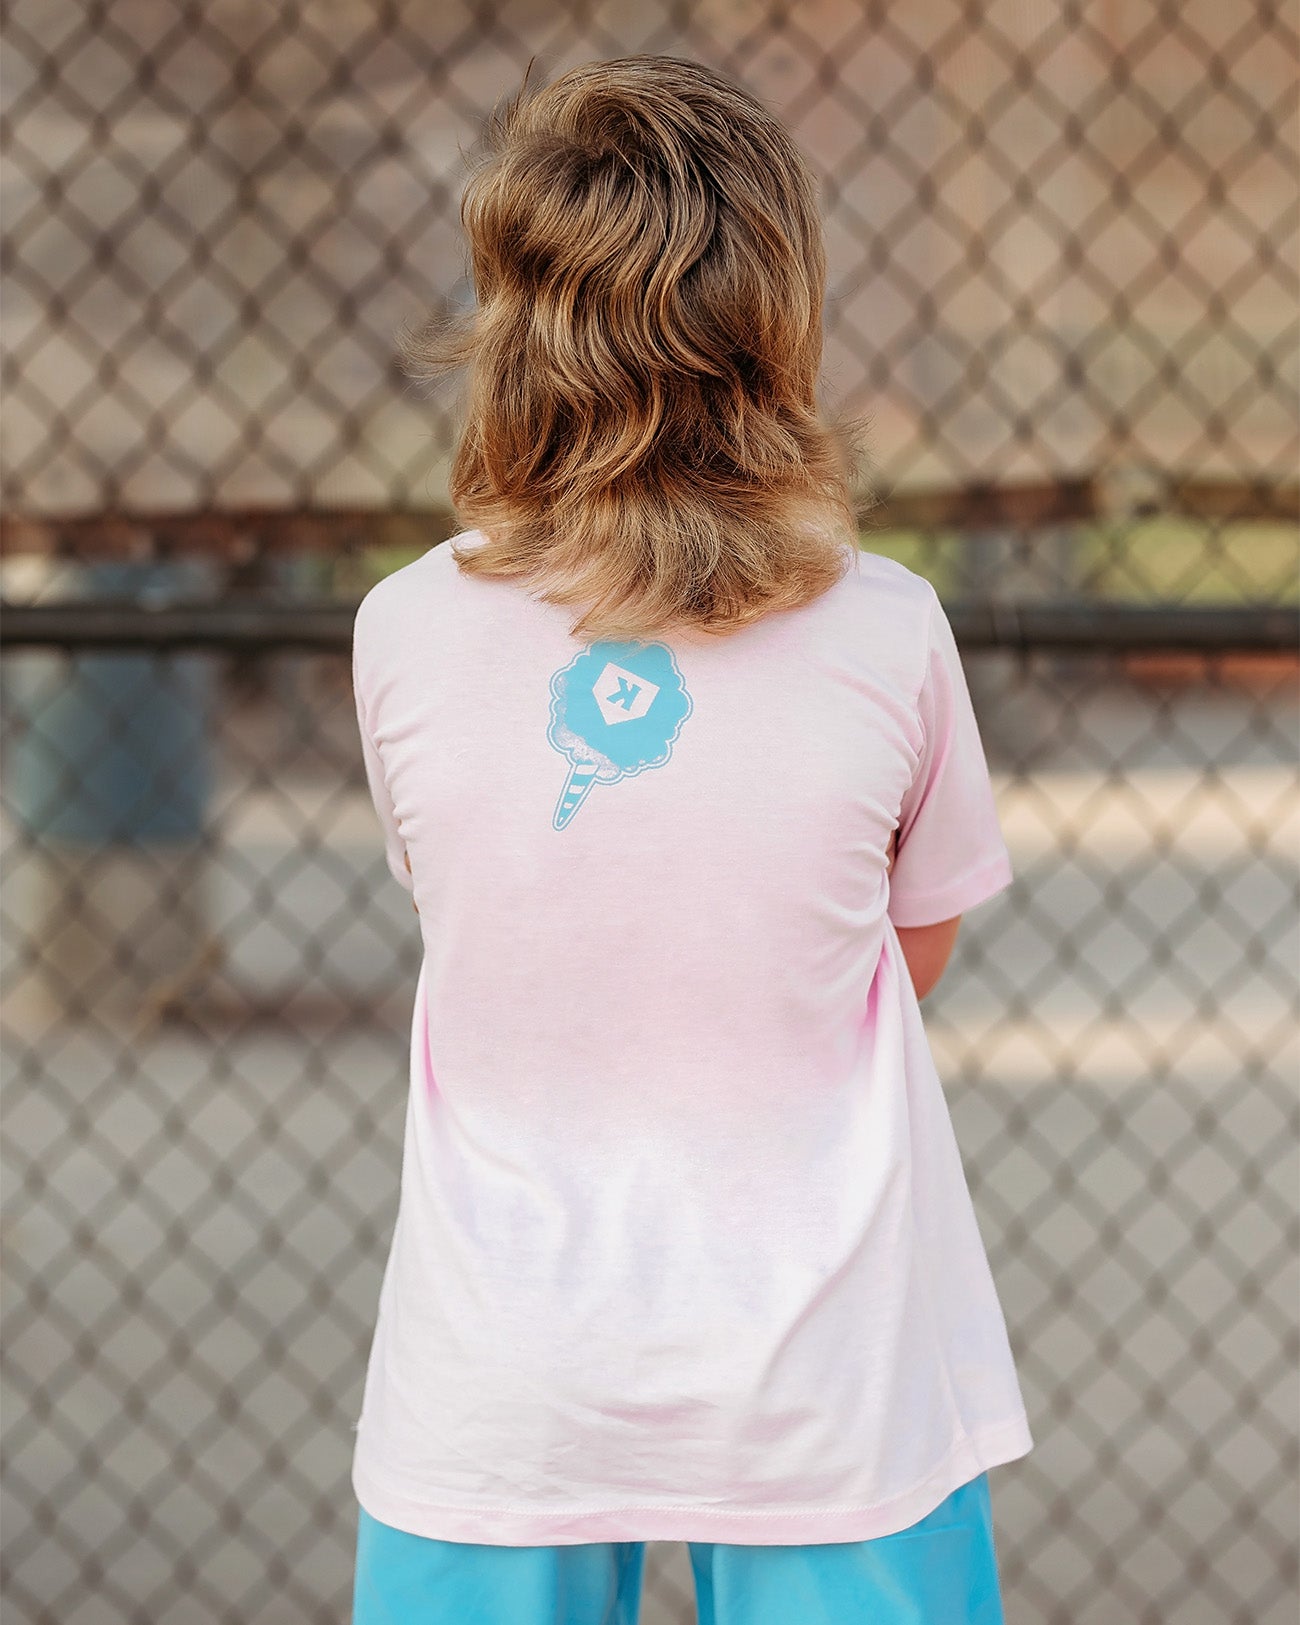 Cotton Candy Pink Youth Tee